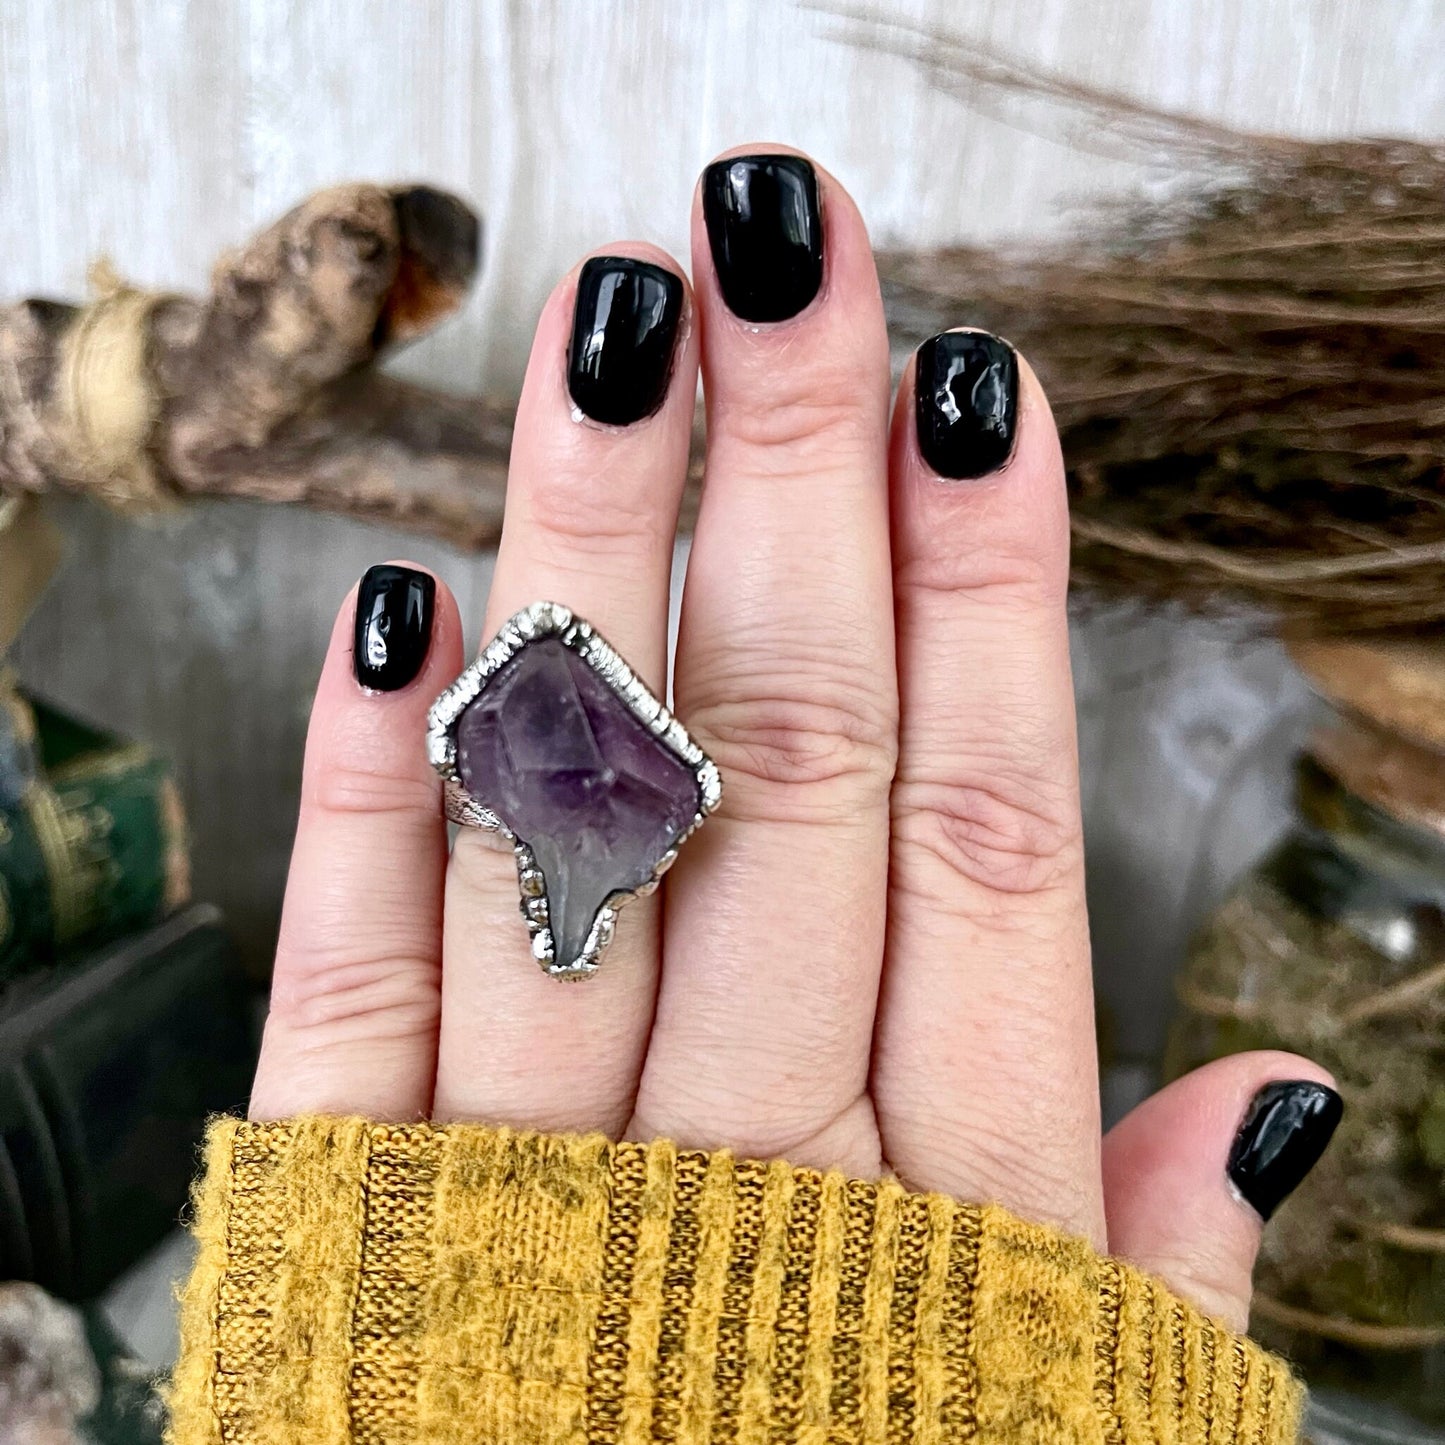 Size 6.5 Big Raw Amethyst Purple Crystal Ring in Fine Silver / Foxlark Collection - One of a Kind